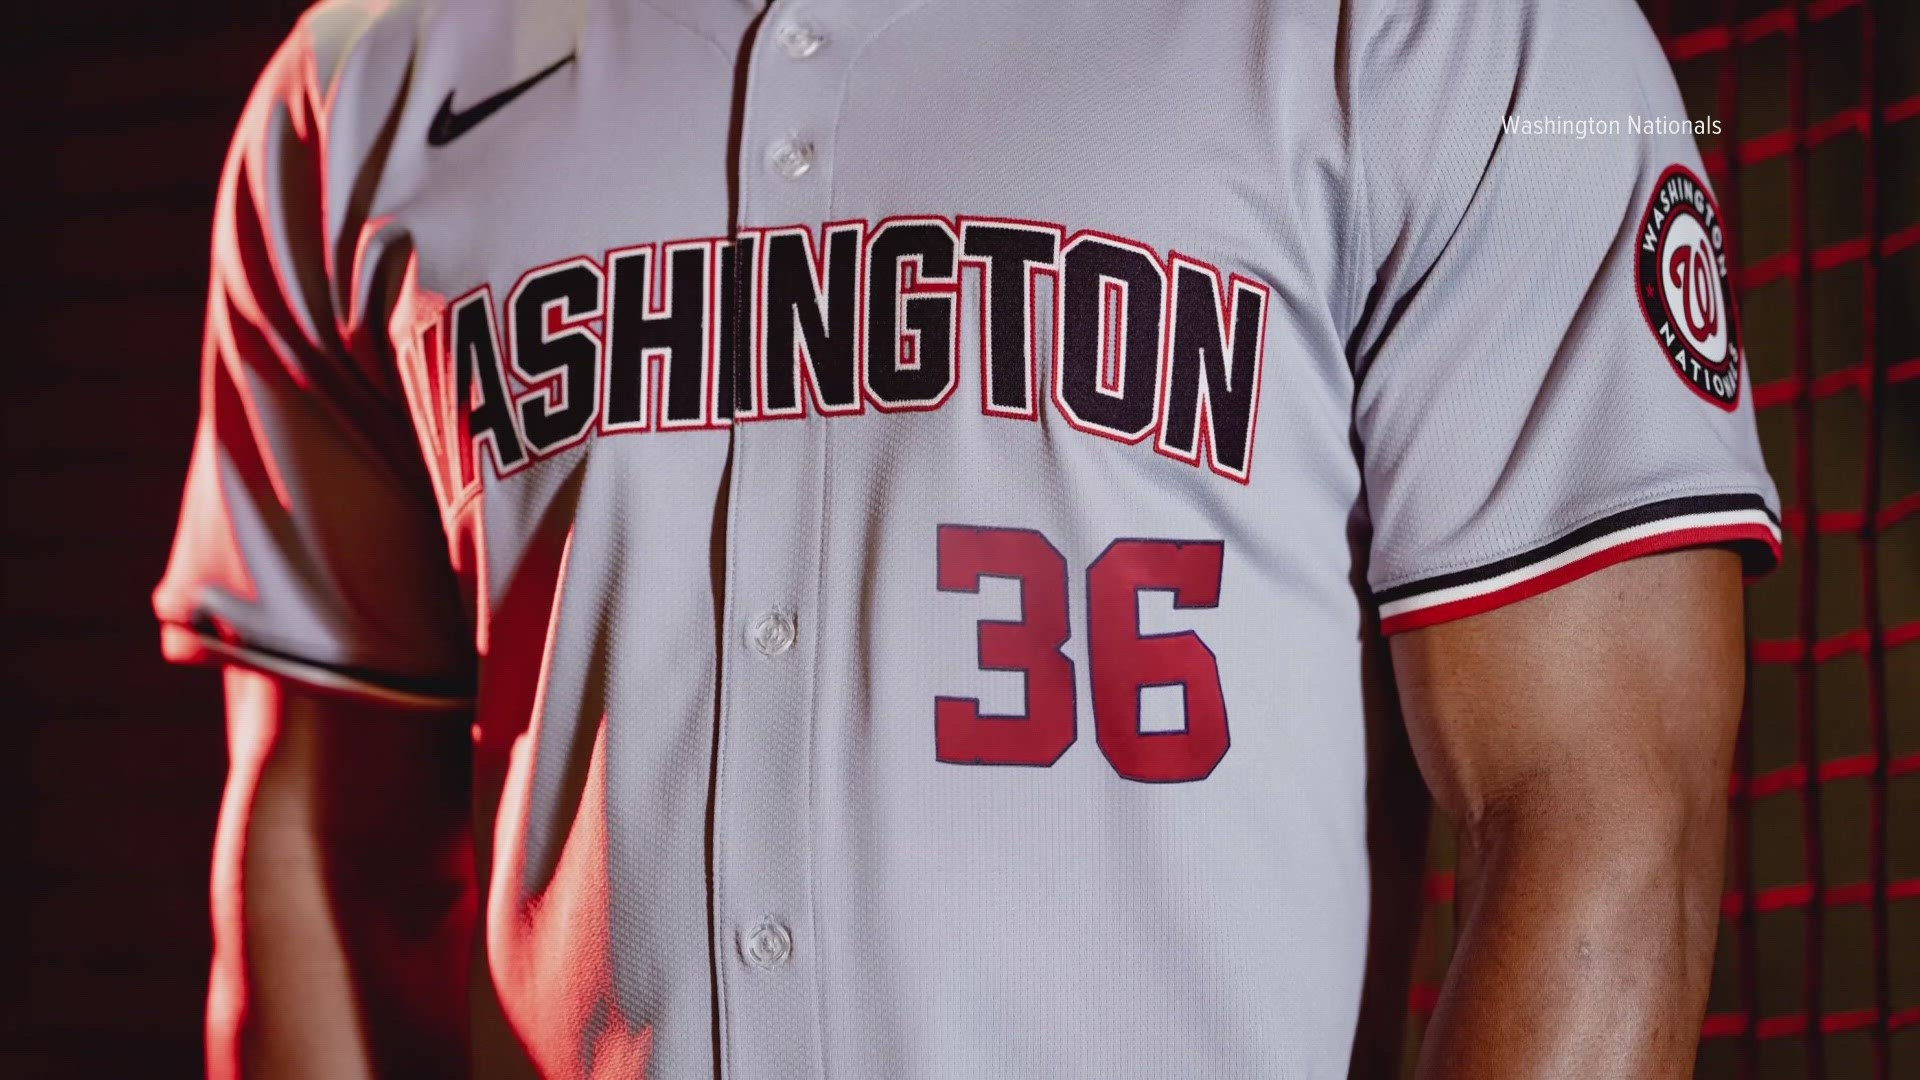 IT'S COMPOSED OF FIVE JERSEYS, INCLUDING THE CLUB'S FIRST PULLOVER WITH A DC SILHOUETTE ON THE ARM.